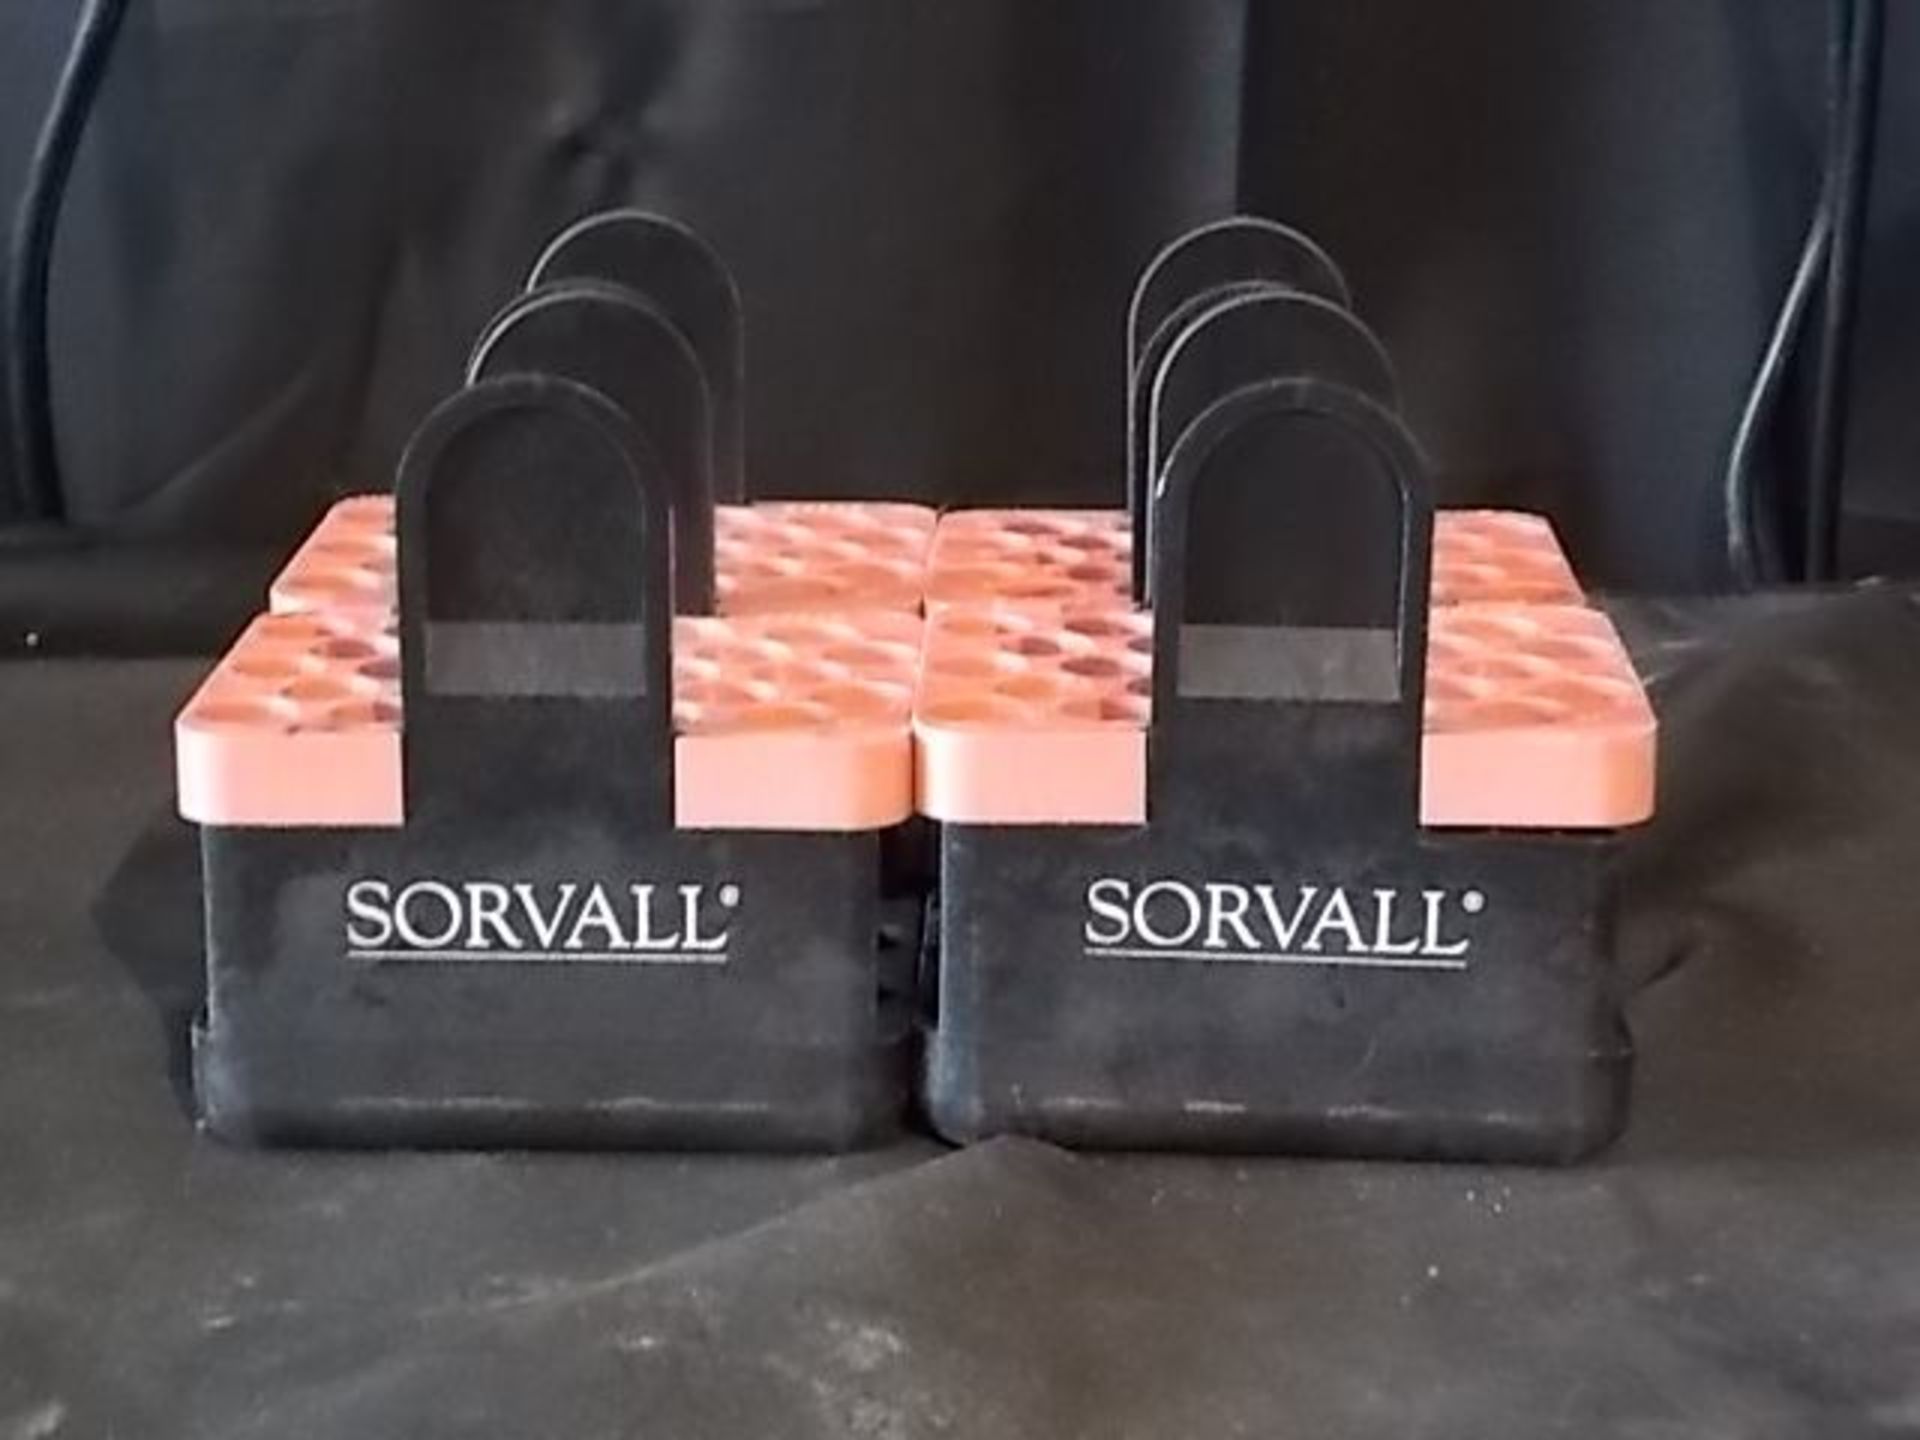 Lot of 4 Sorvall Instruments Tube Swing Bucket Inserts 00842, Qty 1, 330897836587